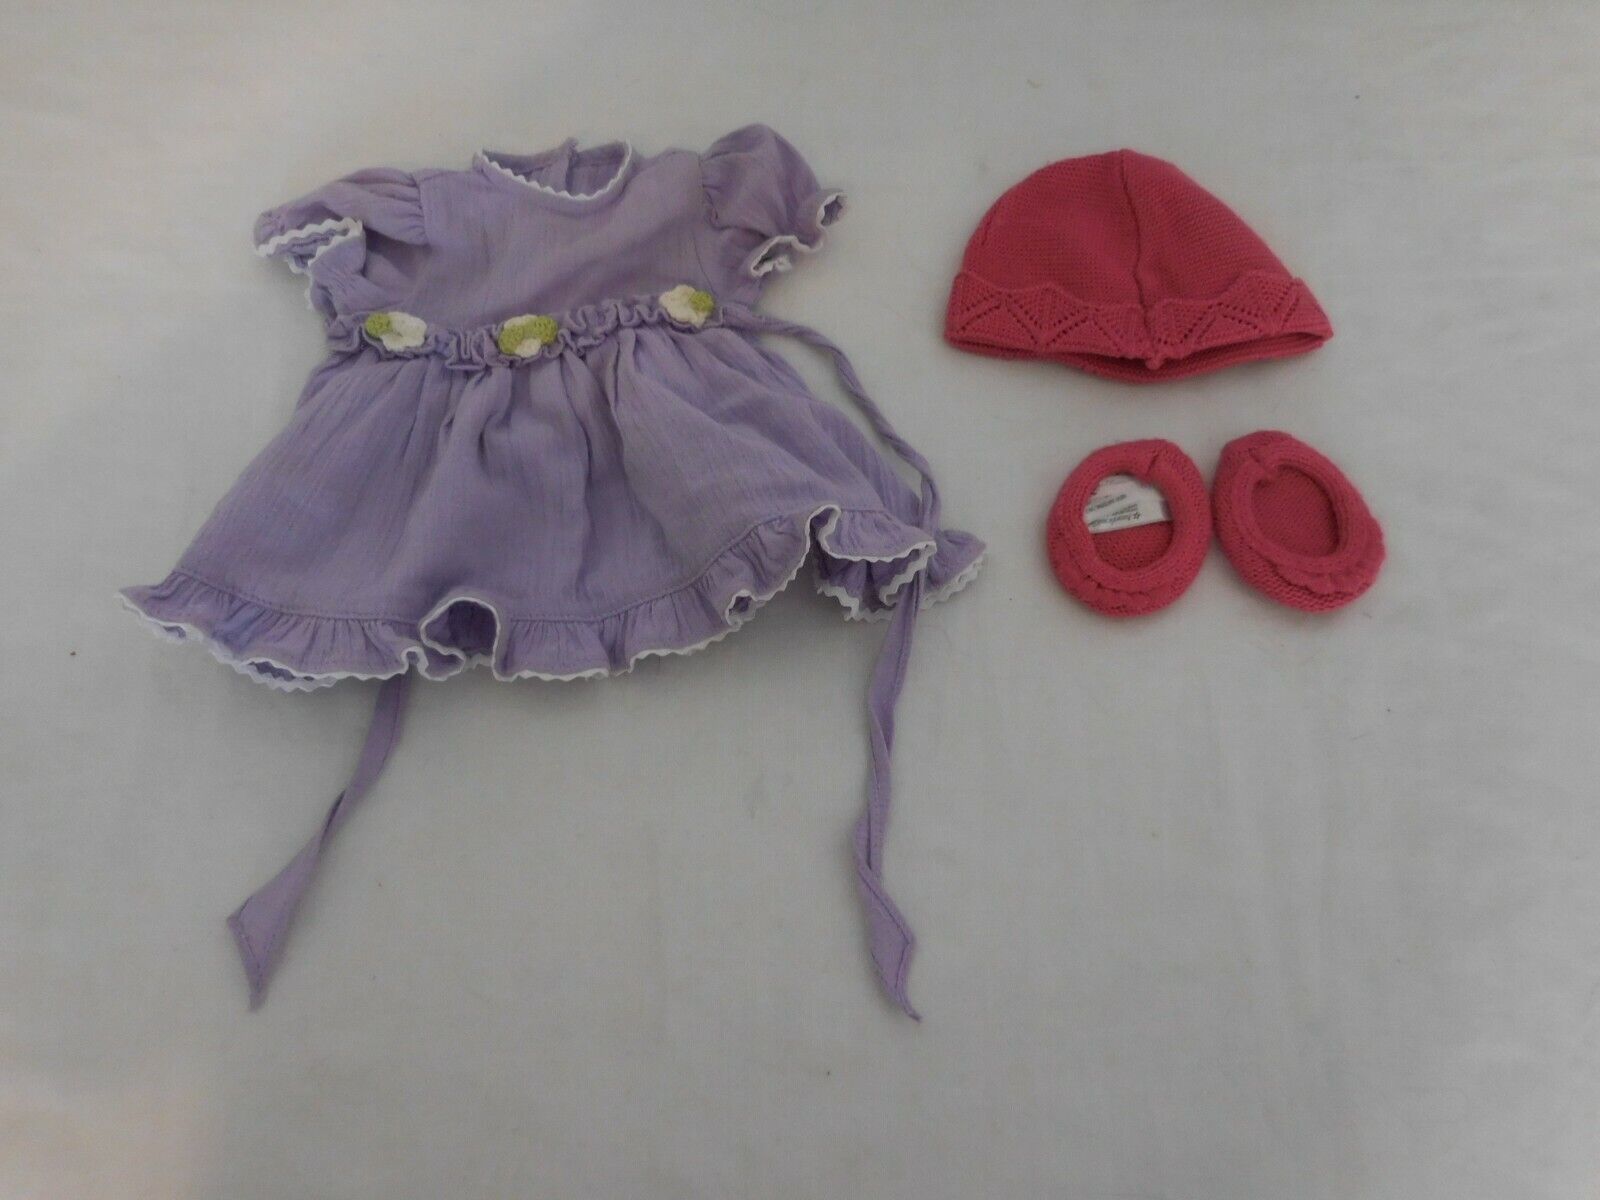 American Girl Bitty Baby 2011 Backpack Starter Set Pink Knit Hat and Shoes - $37.64